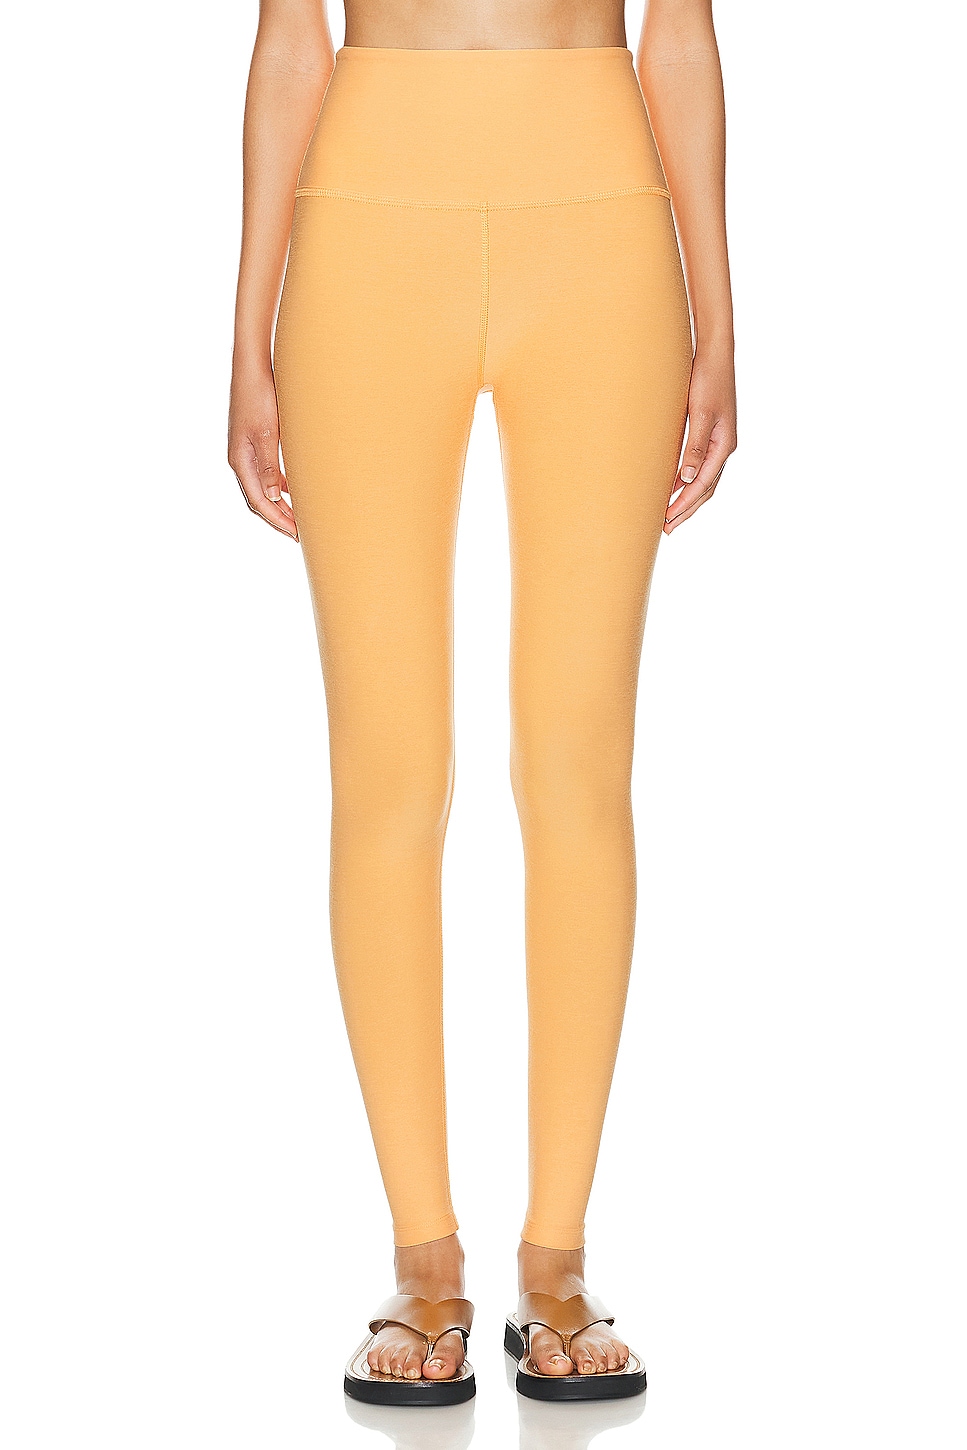 Image 1 of Beyond Yoga Spacedye Caught In The Midi High Waisted Legging in Marmalade Heather